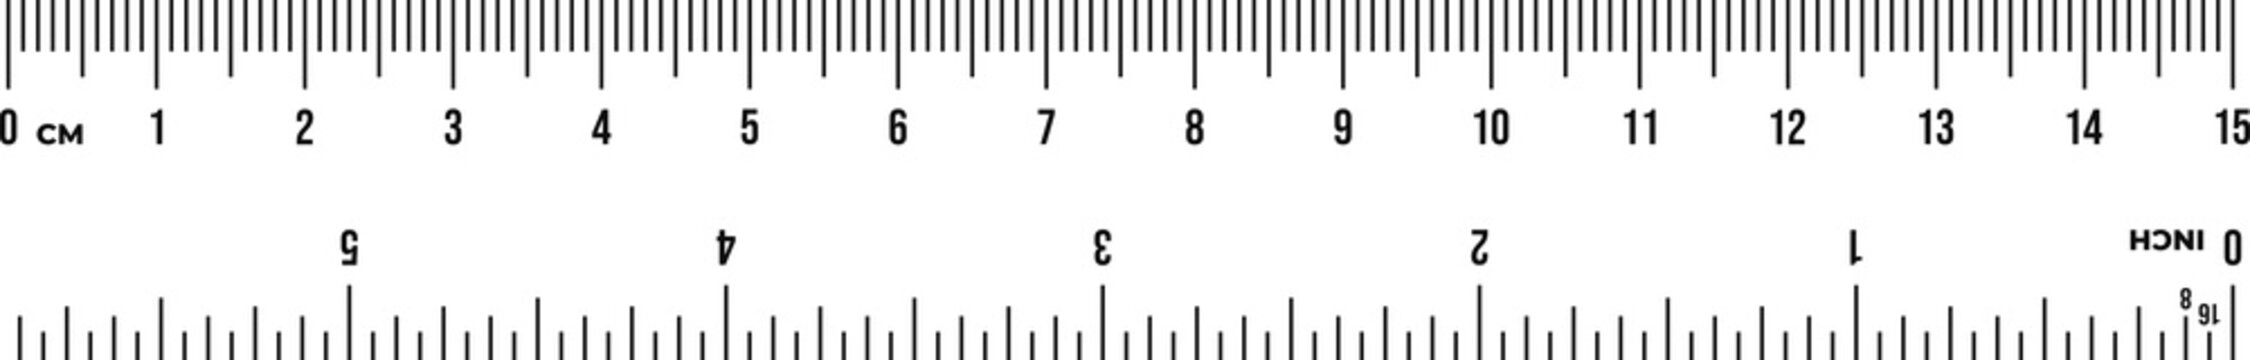 Ruler scale 15 cm and 5 inches. Centimeter and inch scale for measuring